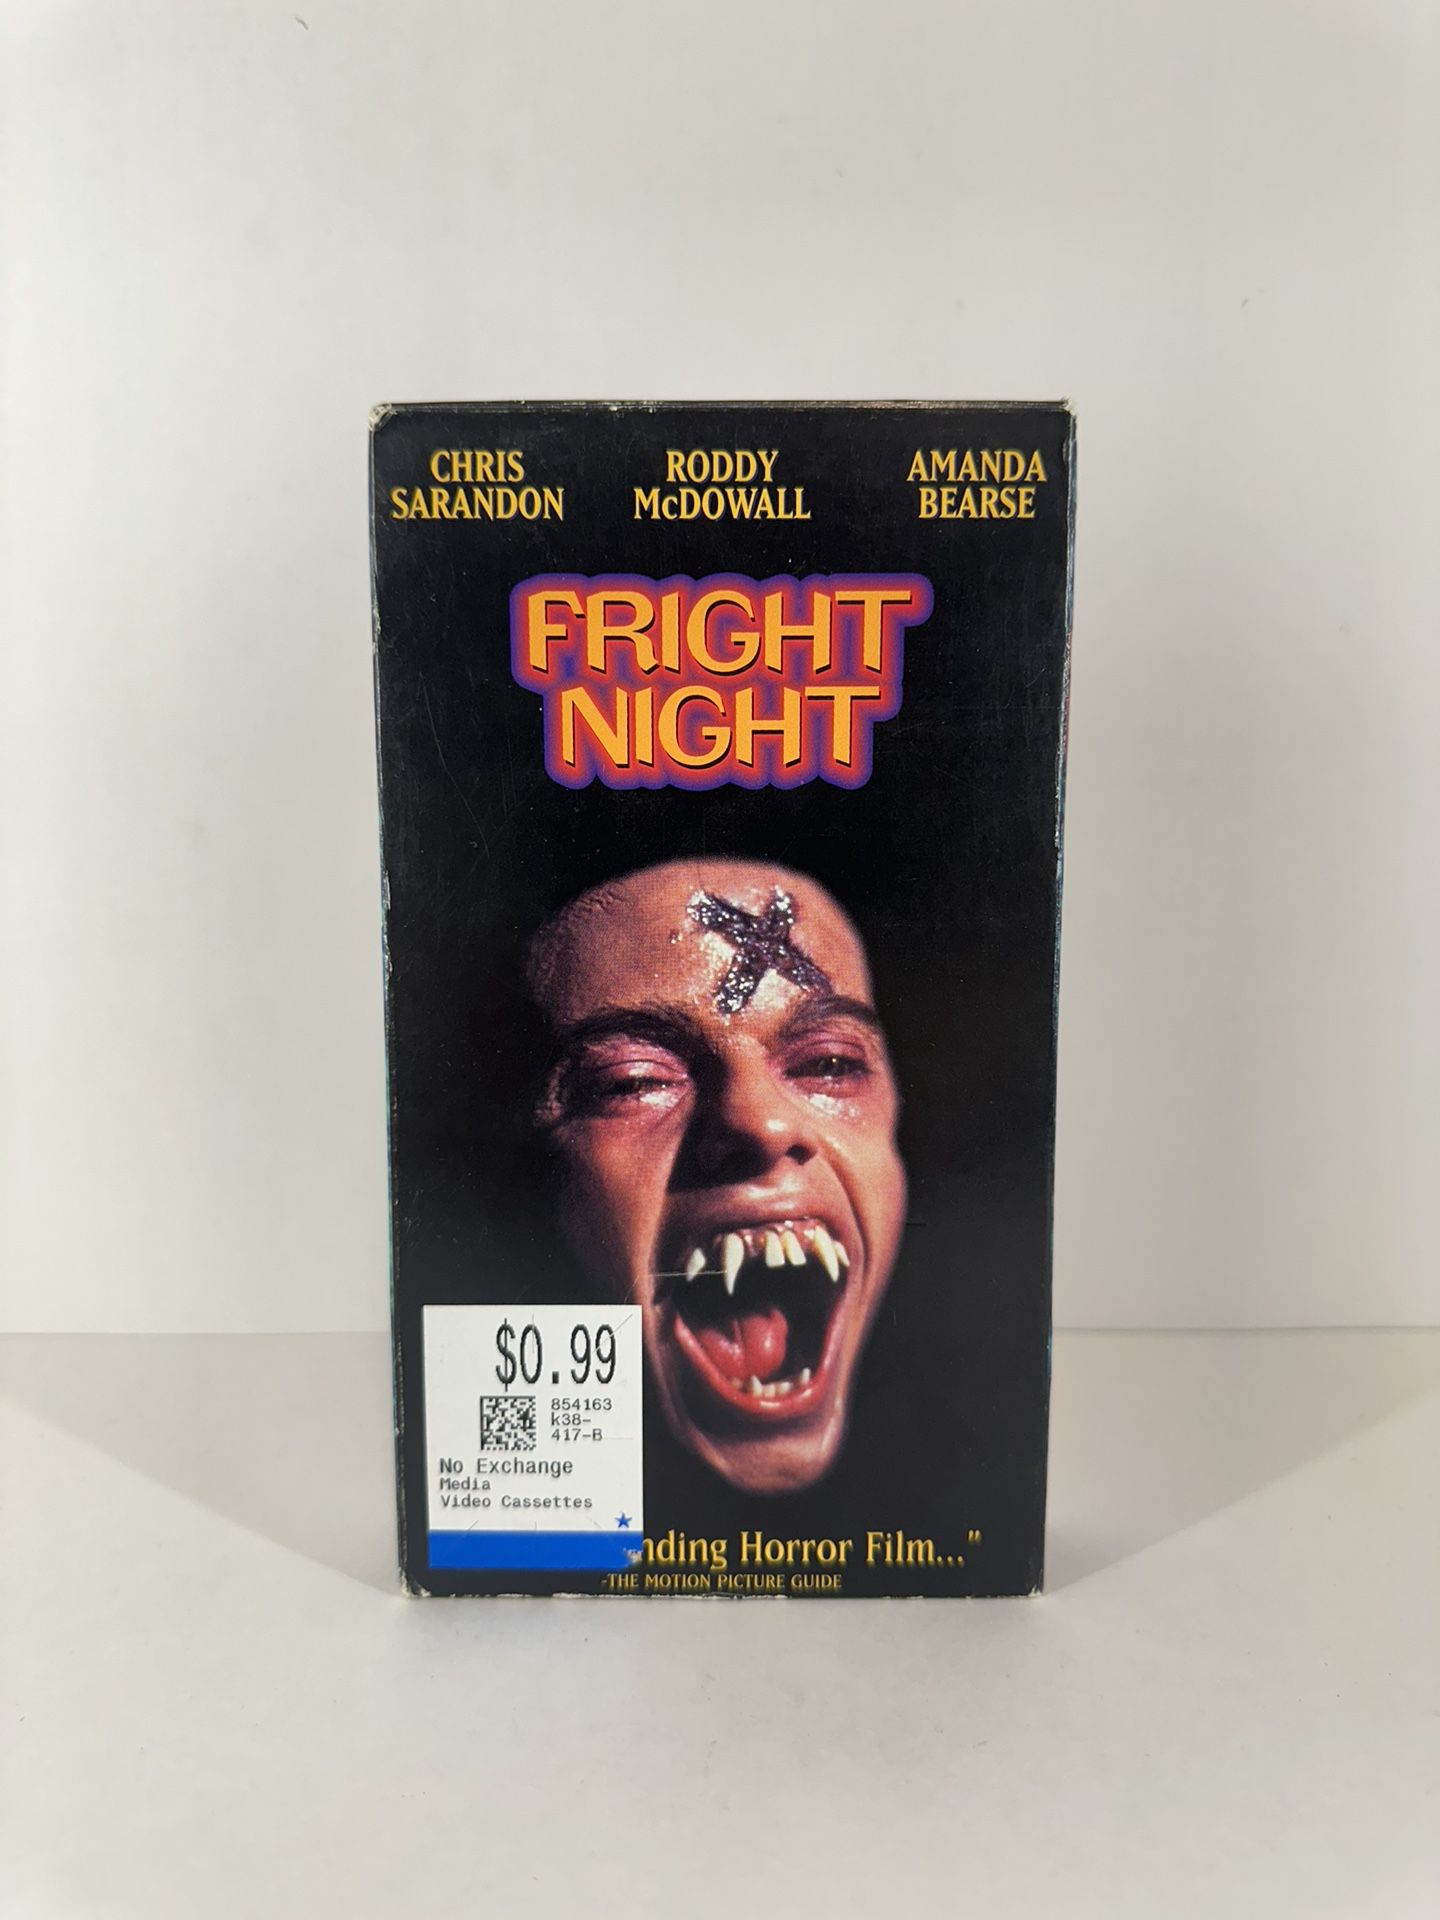 Fright Night (VHS, 1996) Chris Sarandon Roddy McDowall Columbia Pictures Tristar